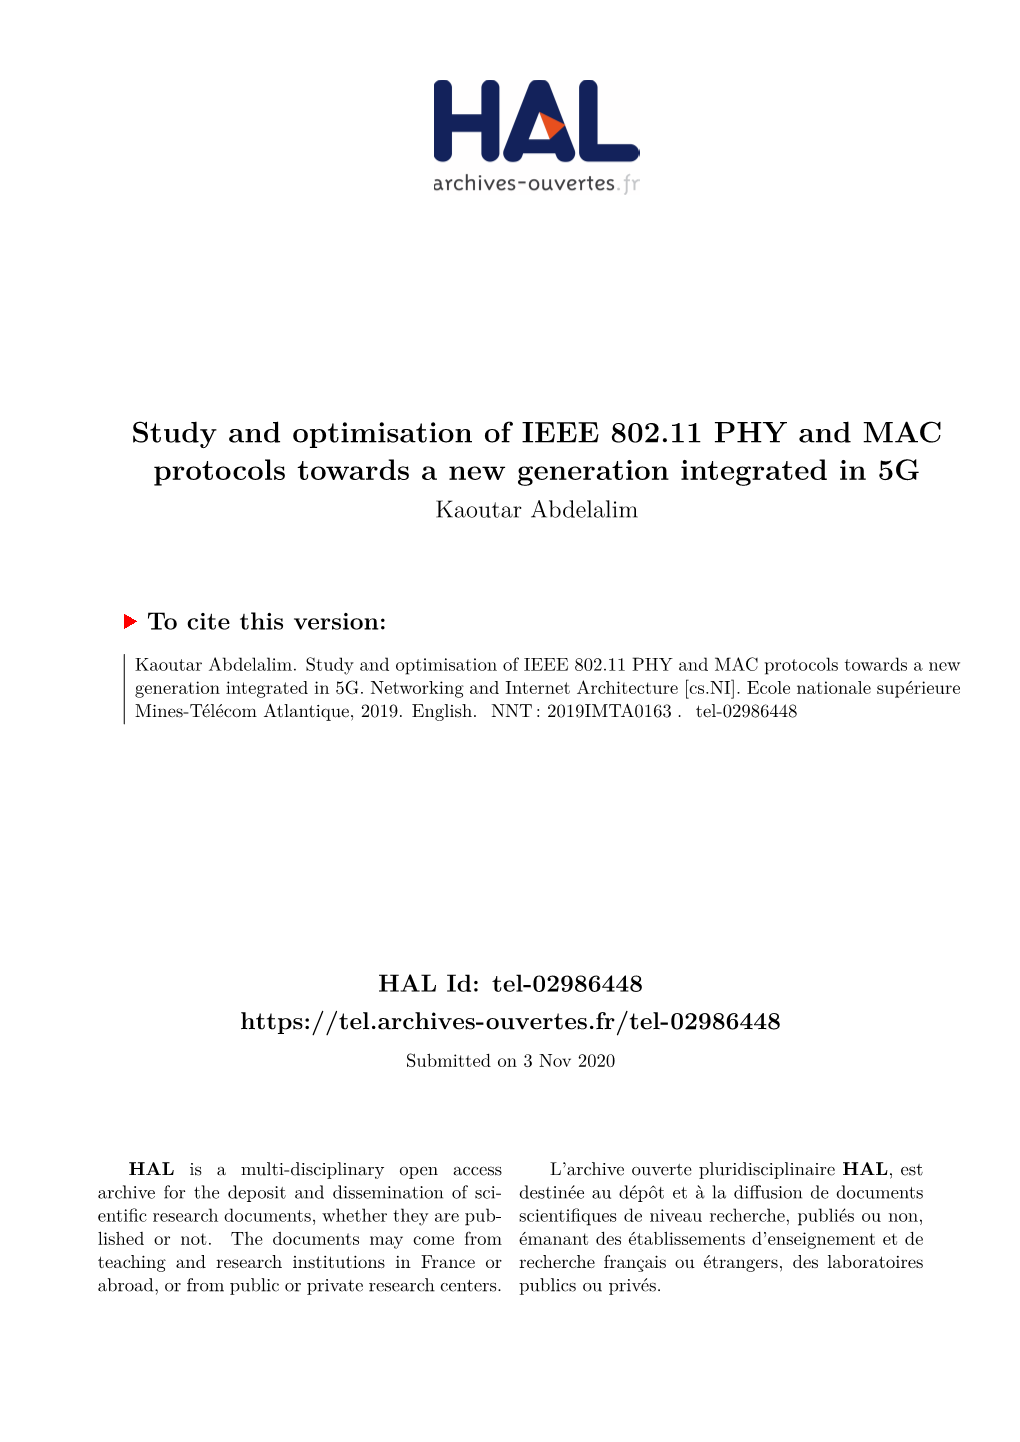 Study and Optimisation of IEEE 802.11 PHY and MAC Protocols Towards a New Generation Integrated in 5G Kaoutar Abdelalim